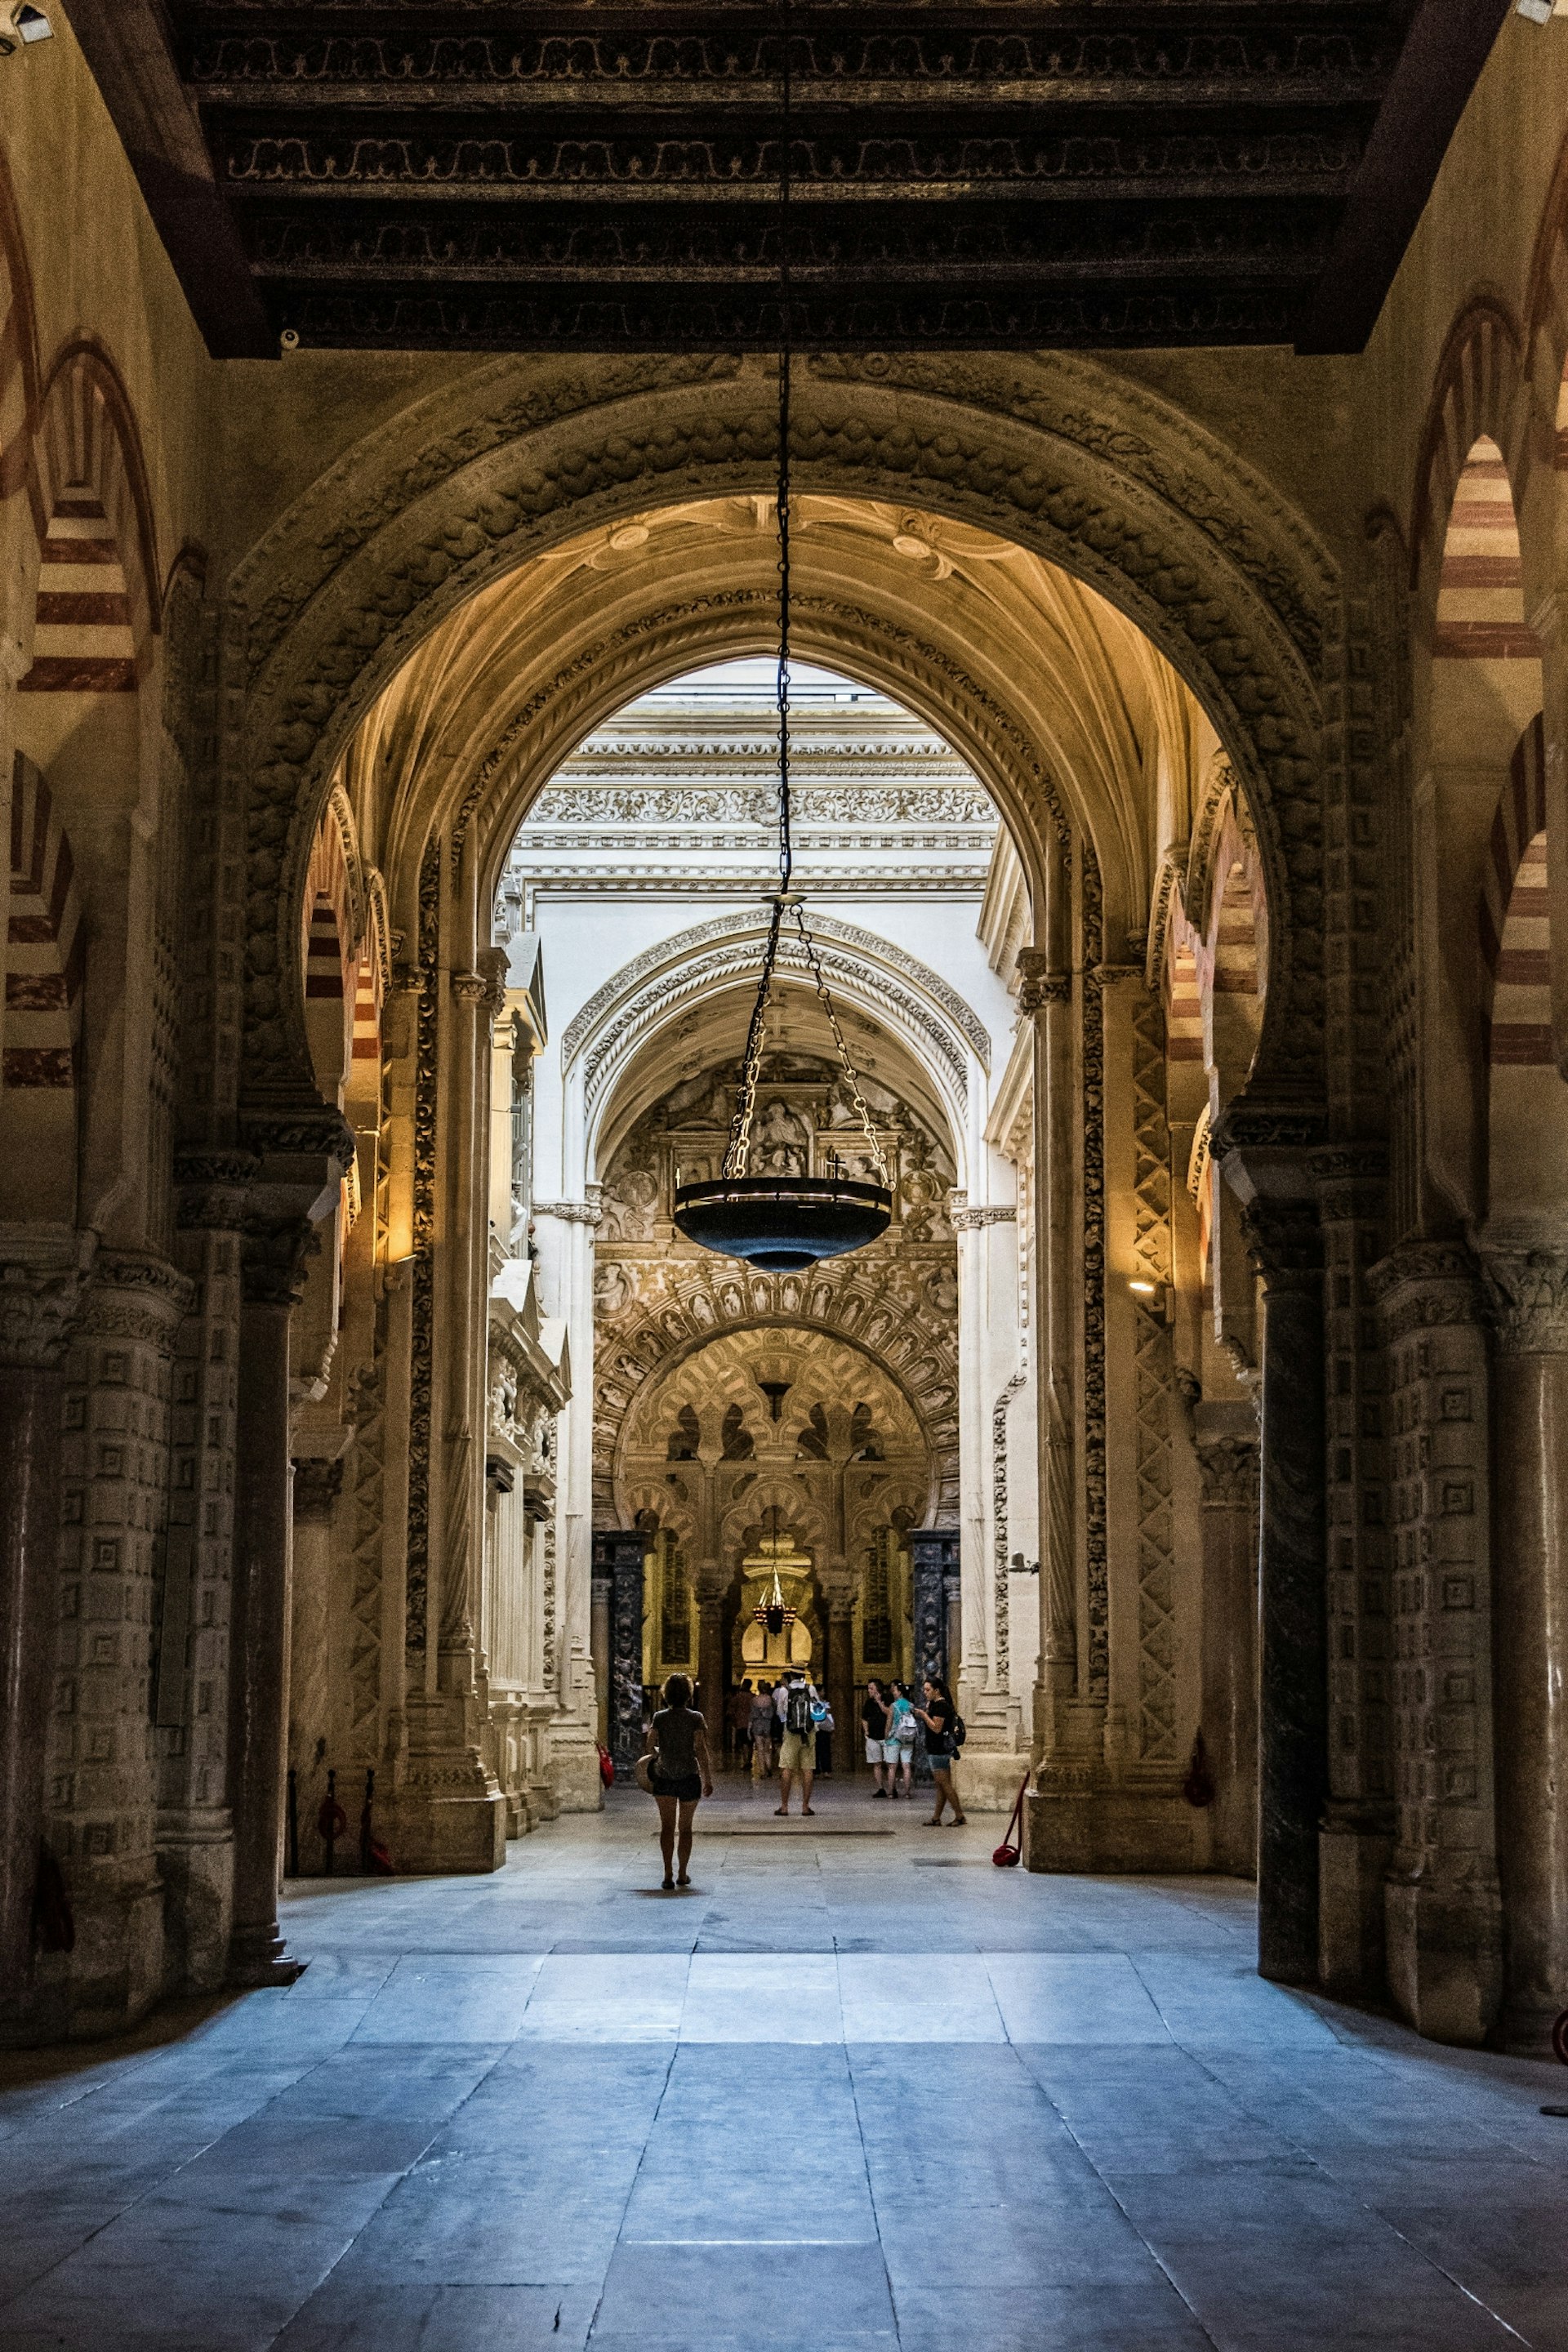 Interior of the Great Mosque and Cathedral of Cordoba